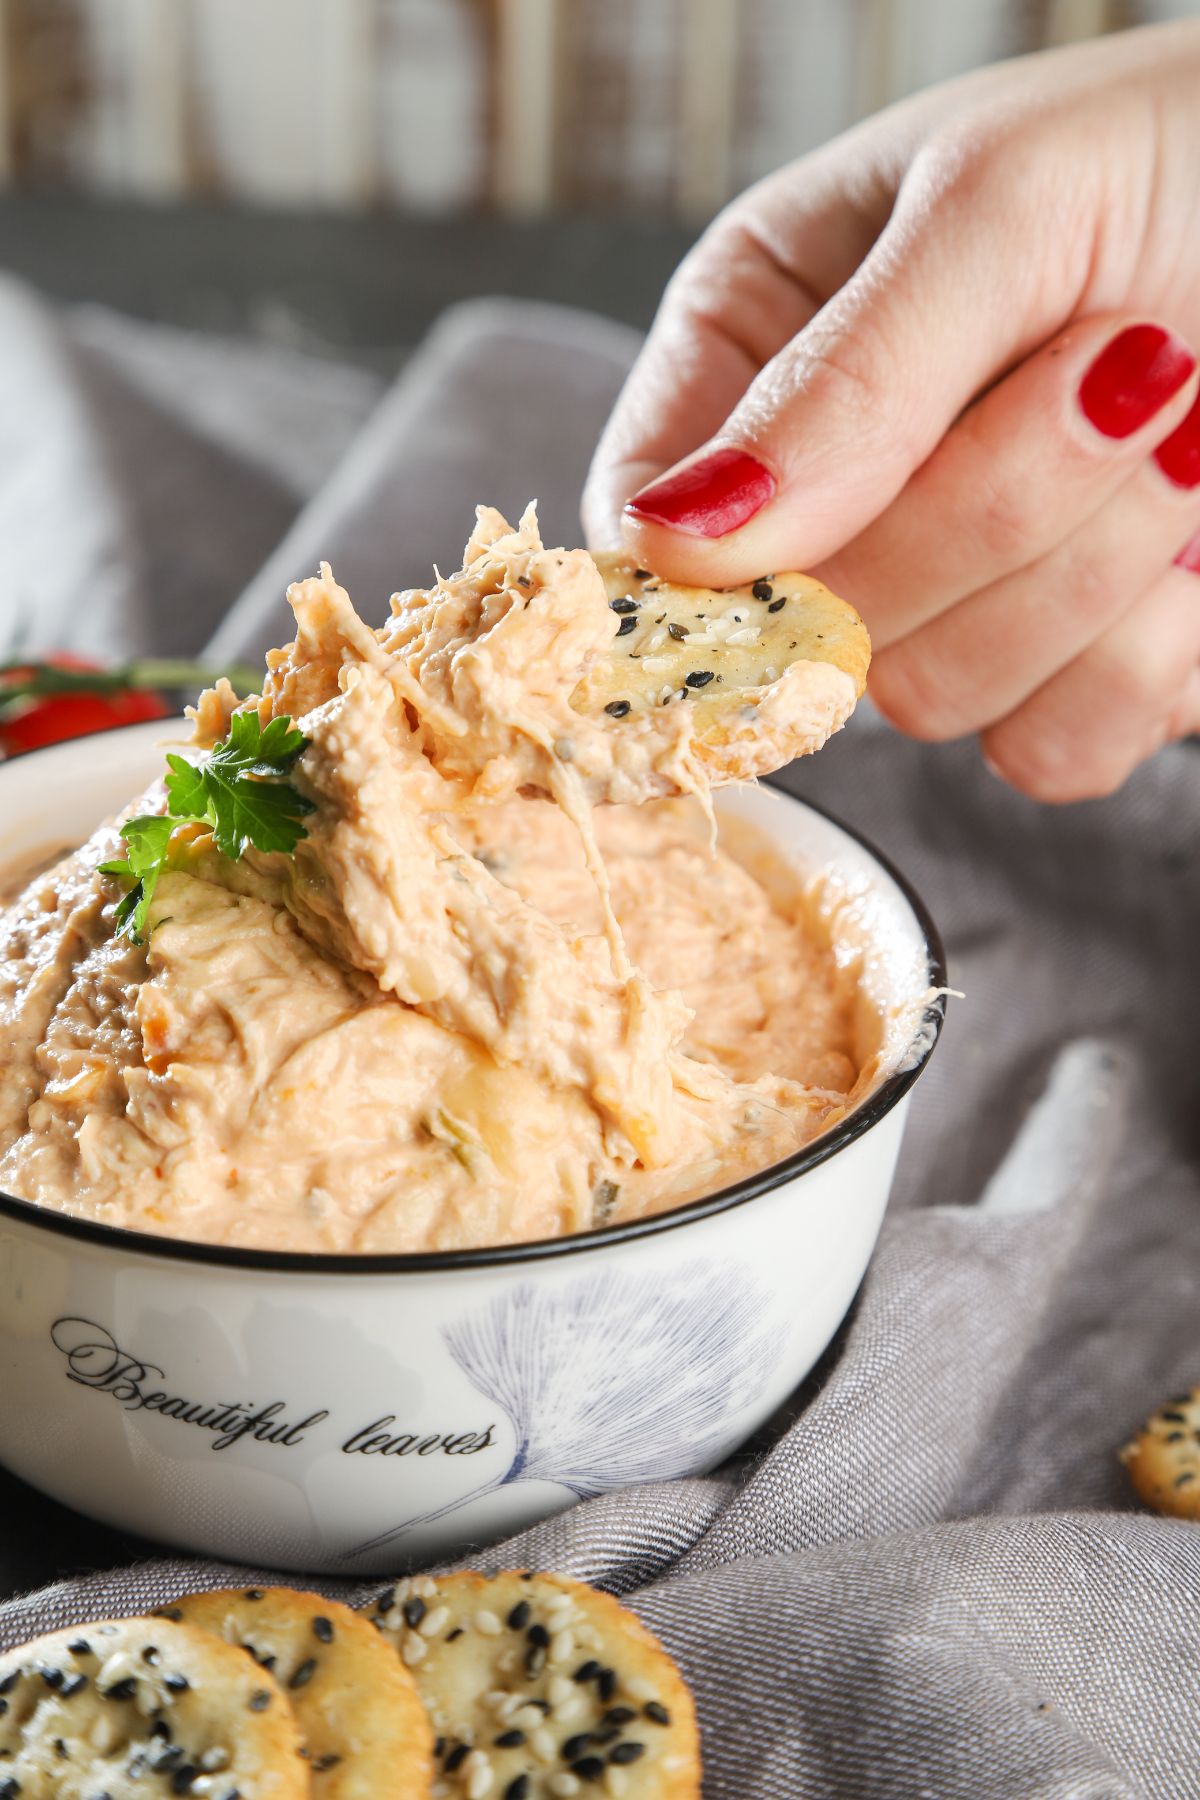 hand with red nails dipping into white bowl of dip with cracker